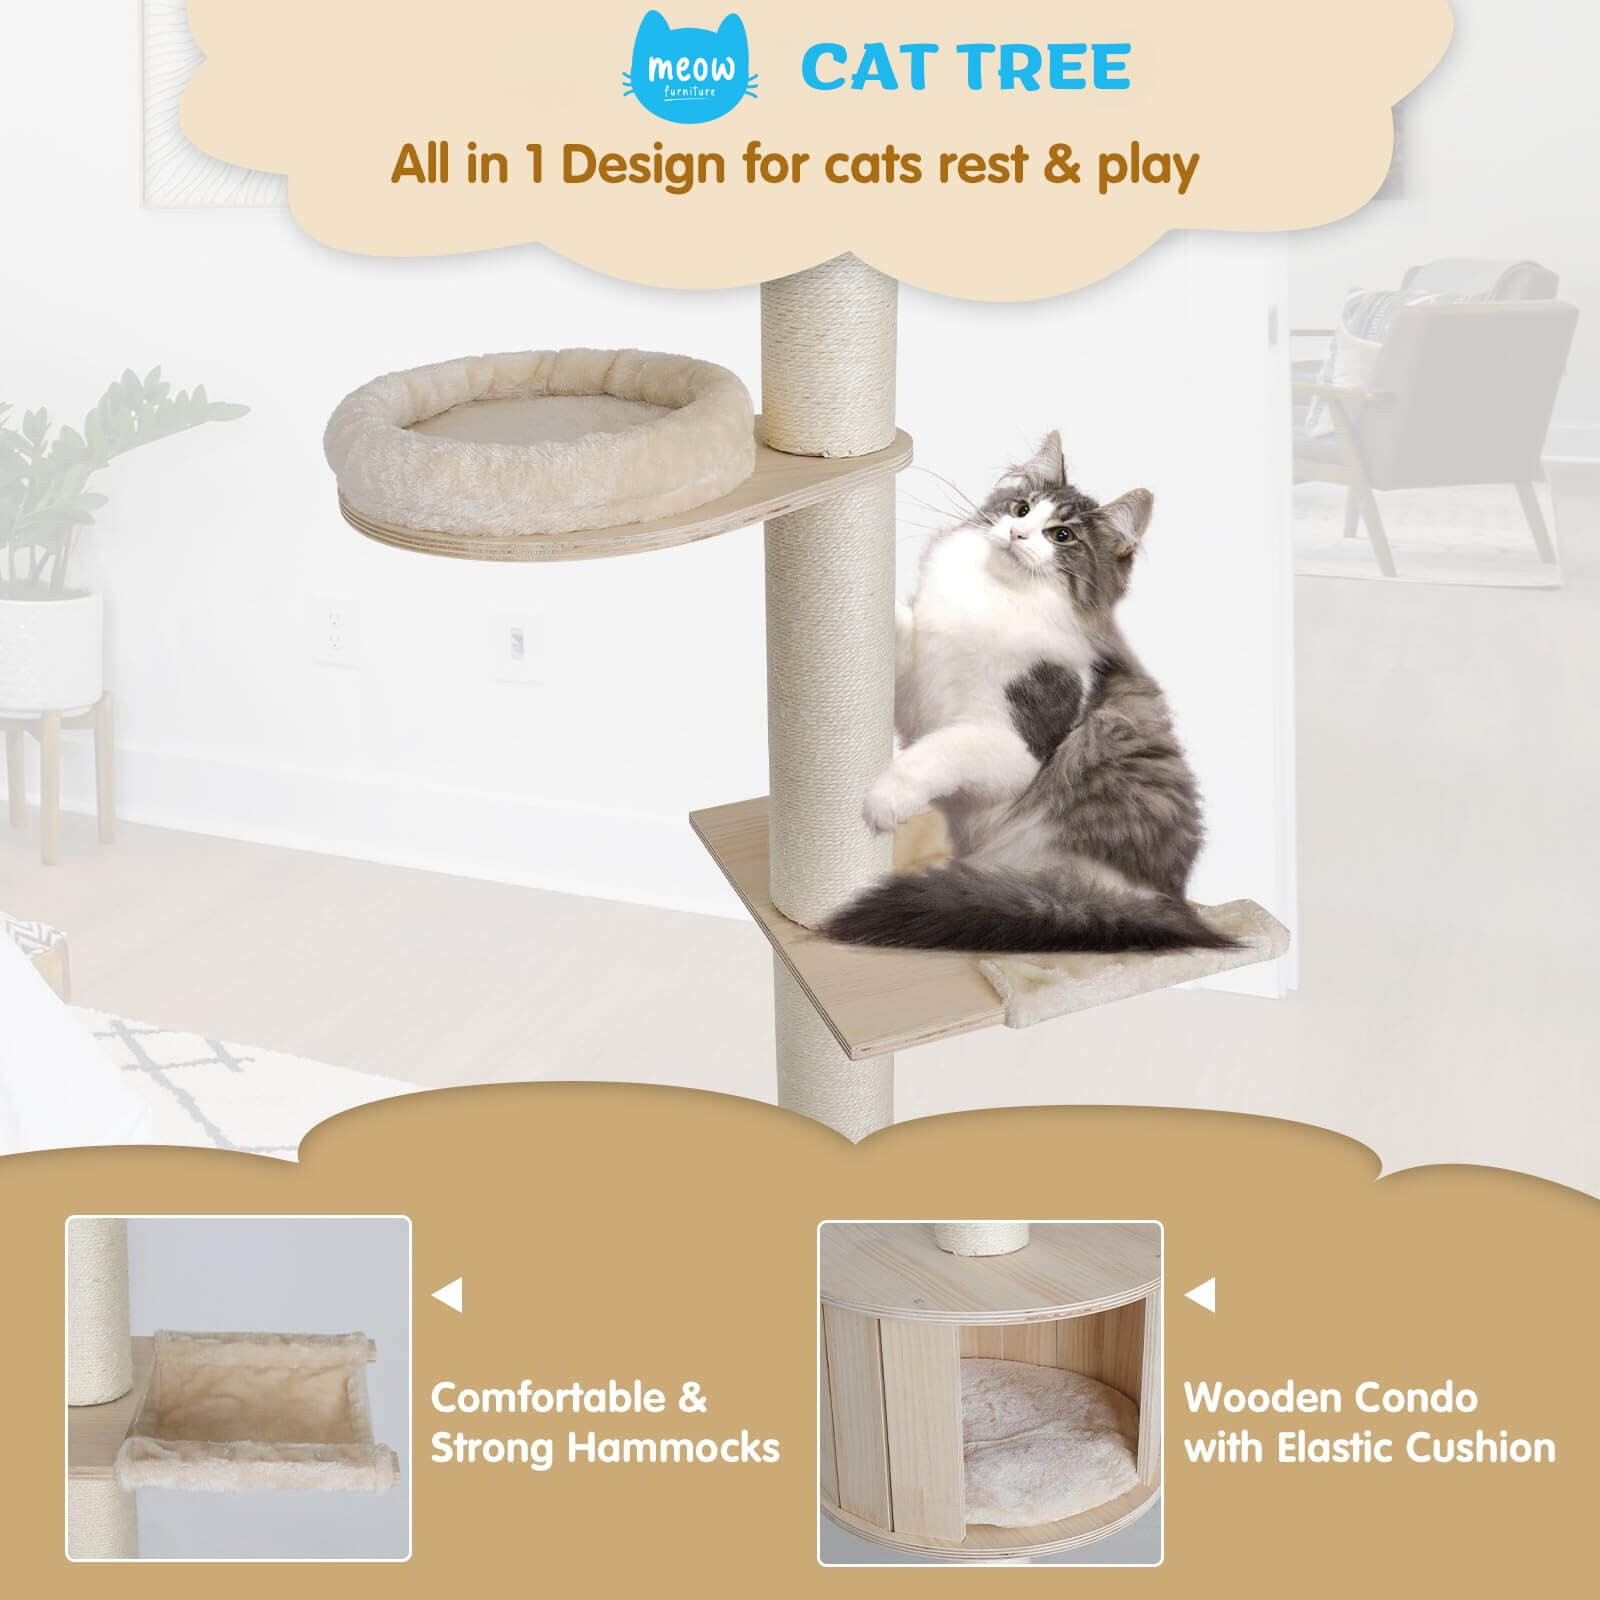 6 Tiers Cat Tower Adjustable Height PF008 features display